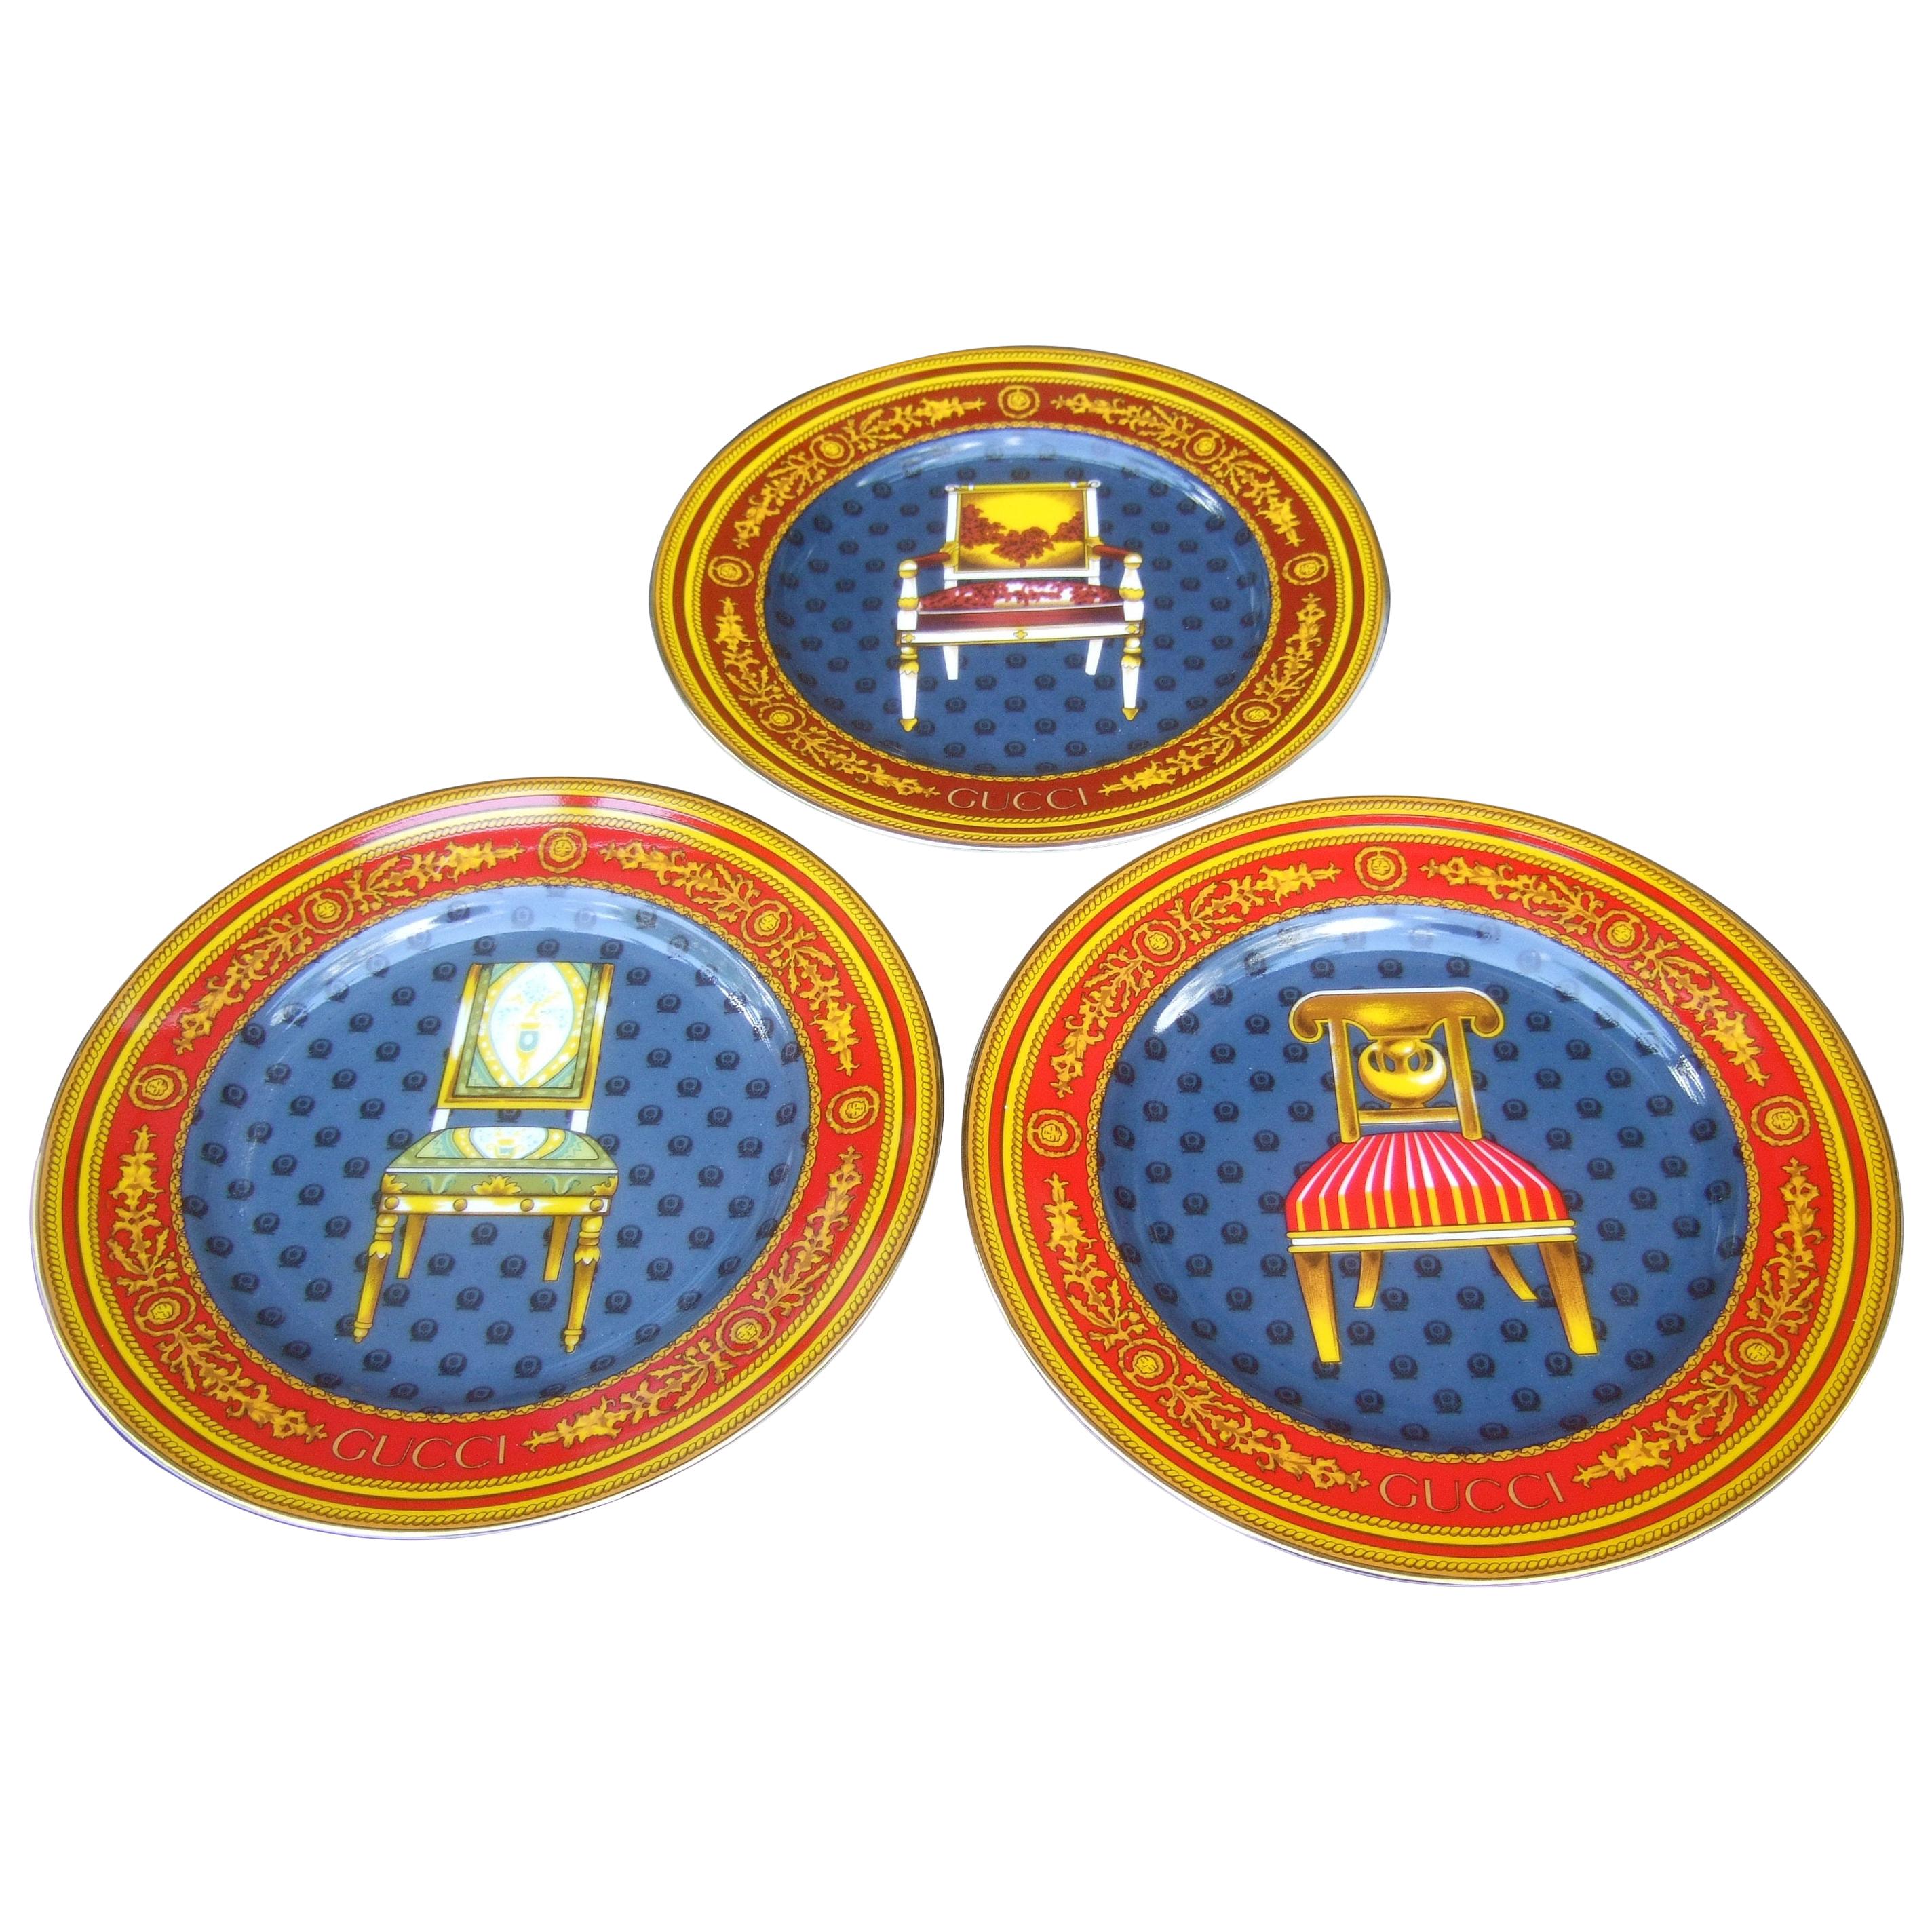 Set of Three Gucci Porcelain Decorative Chair Themed Plates c 1990s